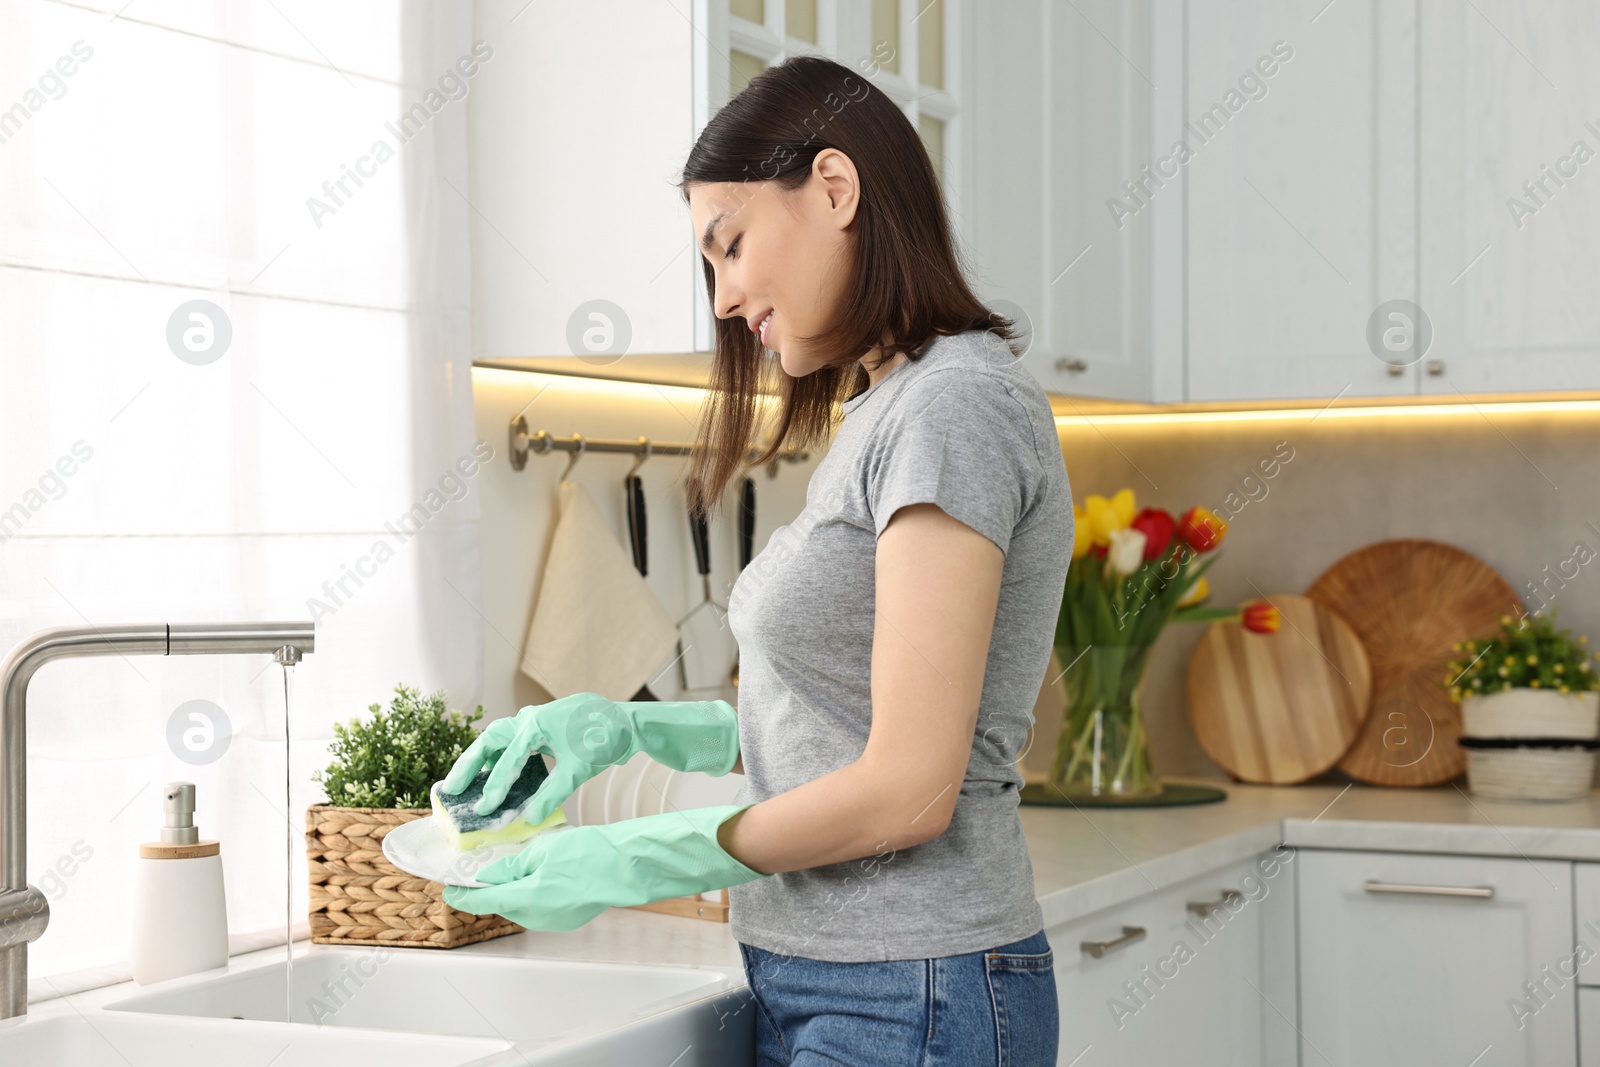 Photo of Woman washing dishes in kitchen sink. Cleaning chores